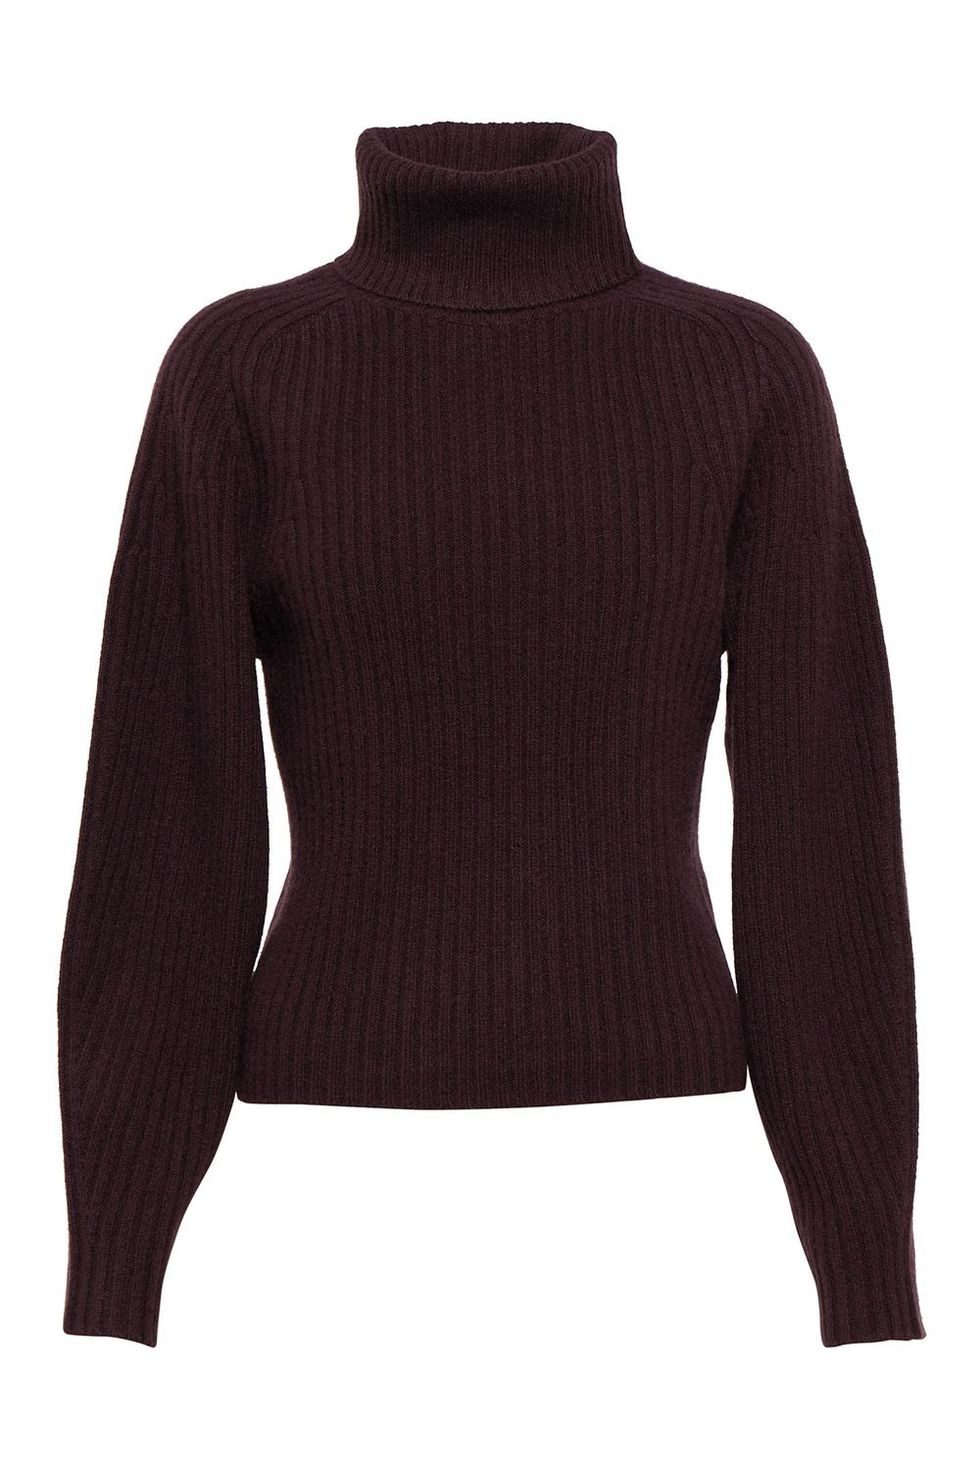 The cashmere knit 